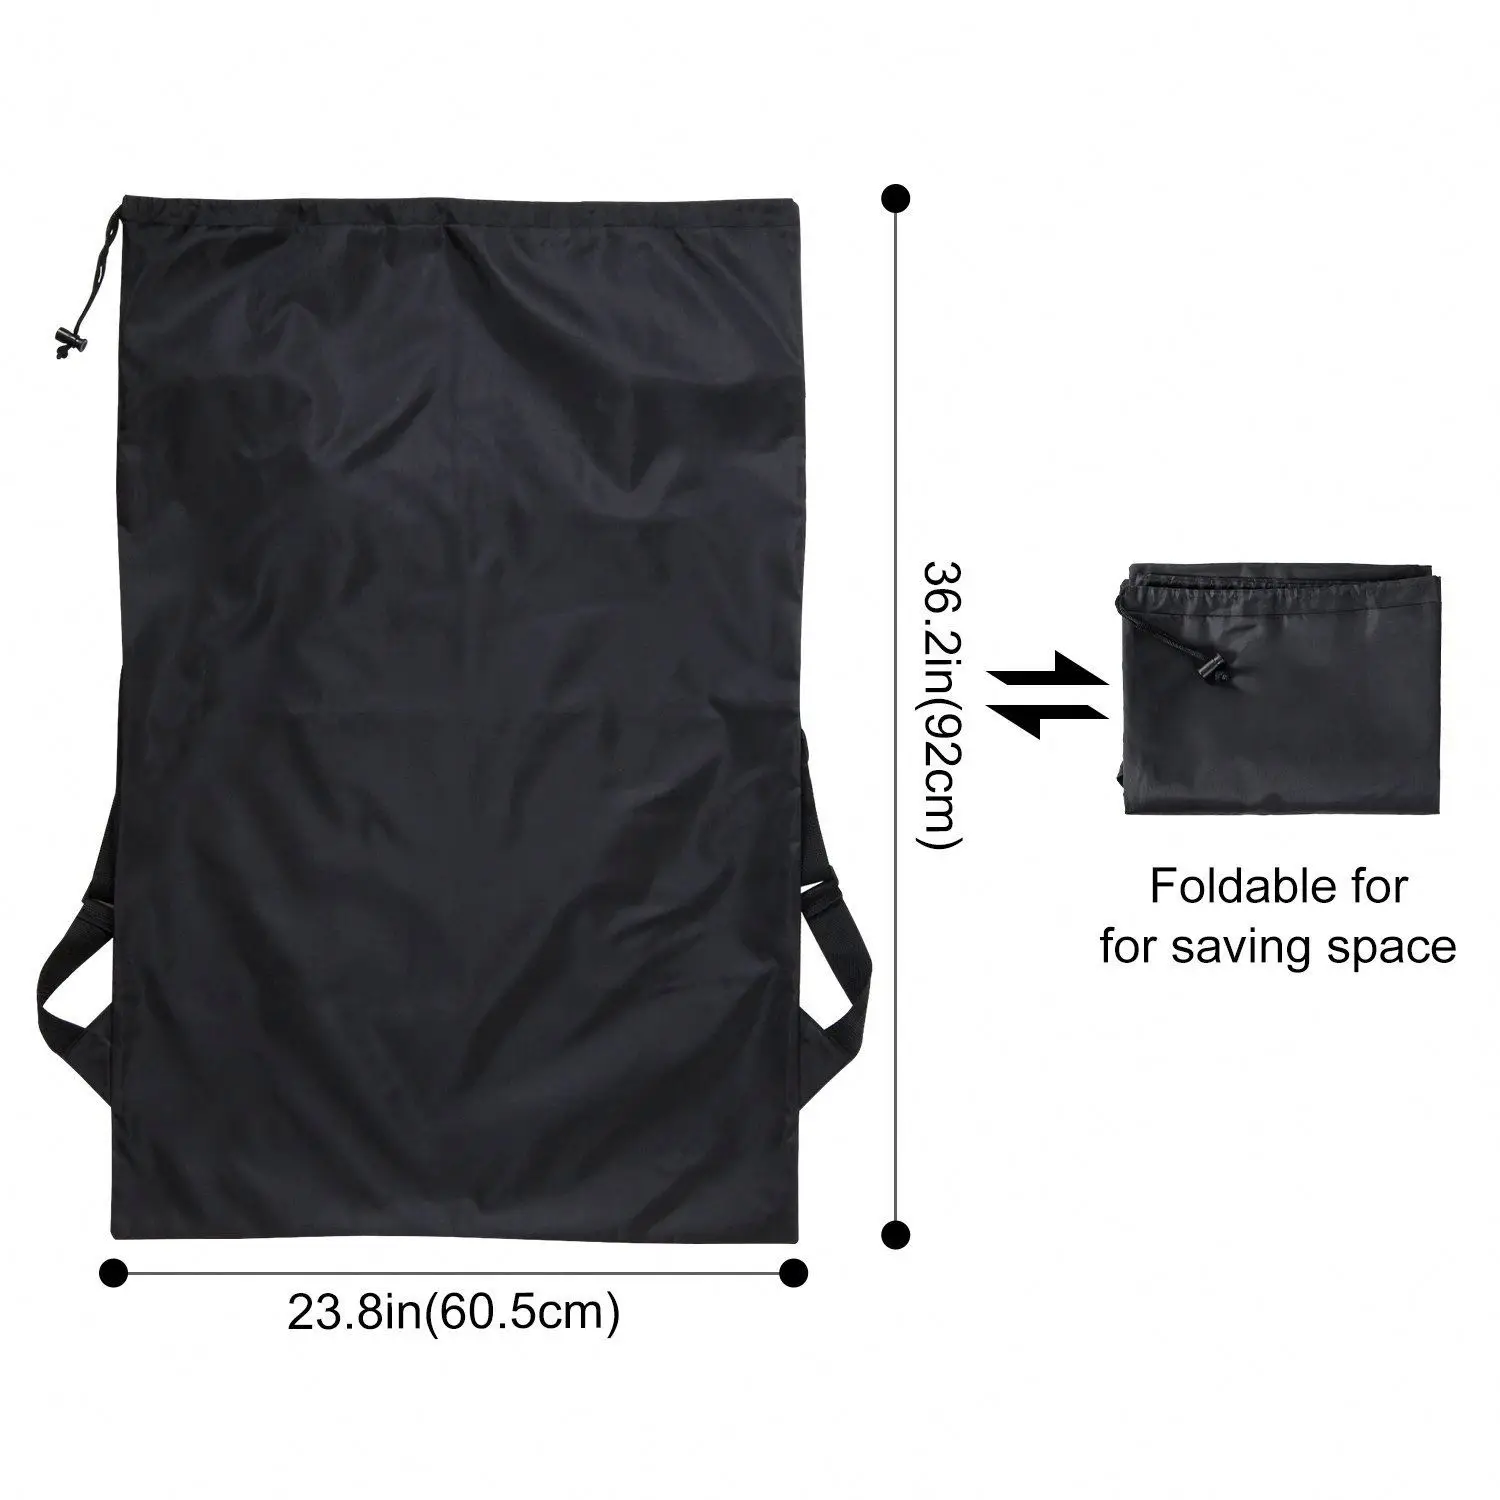 Hot Sale Polyester Waterproof Laundry Bag Large Camping Travel Clothes Storage Bag with drawstring closure